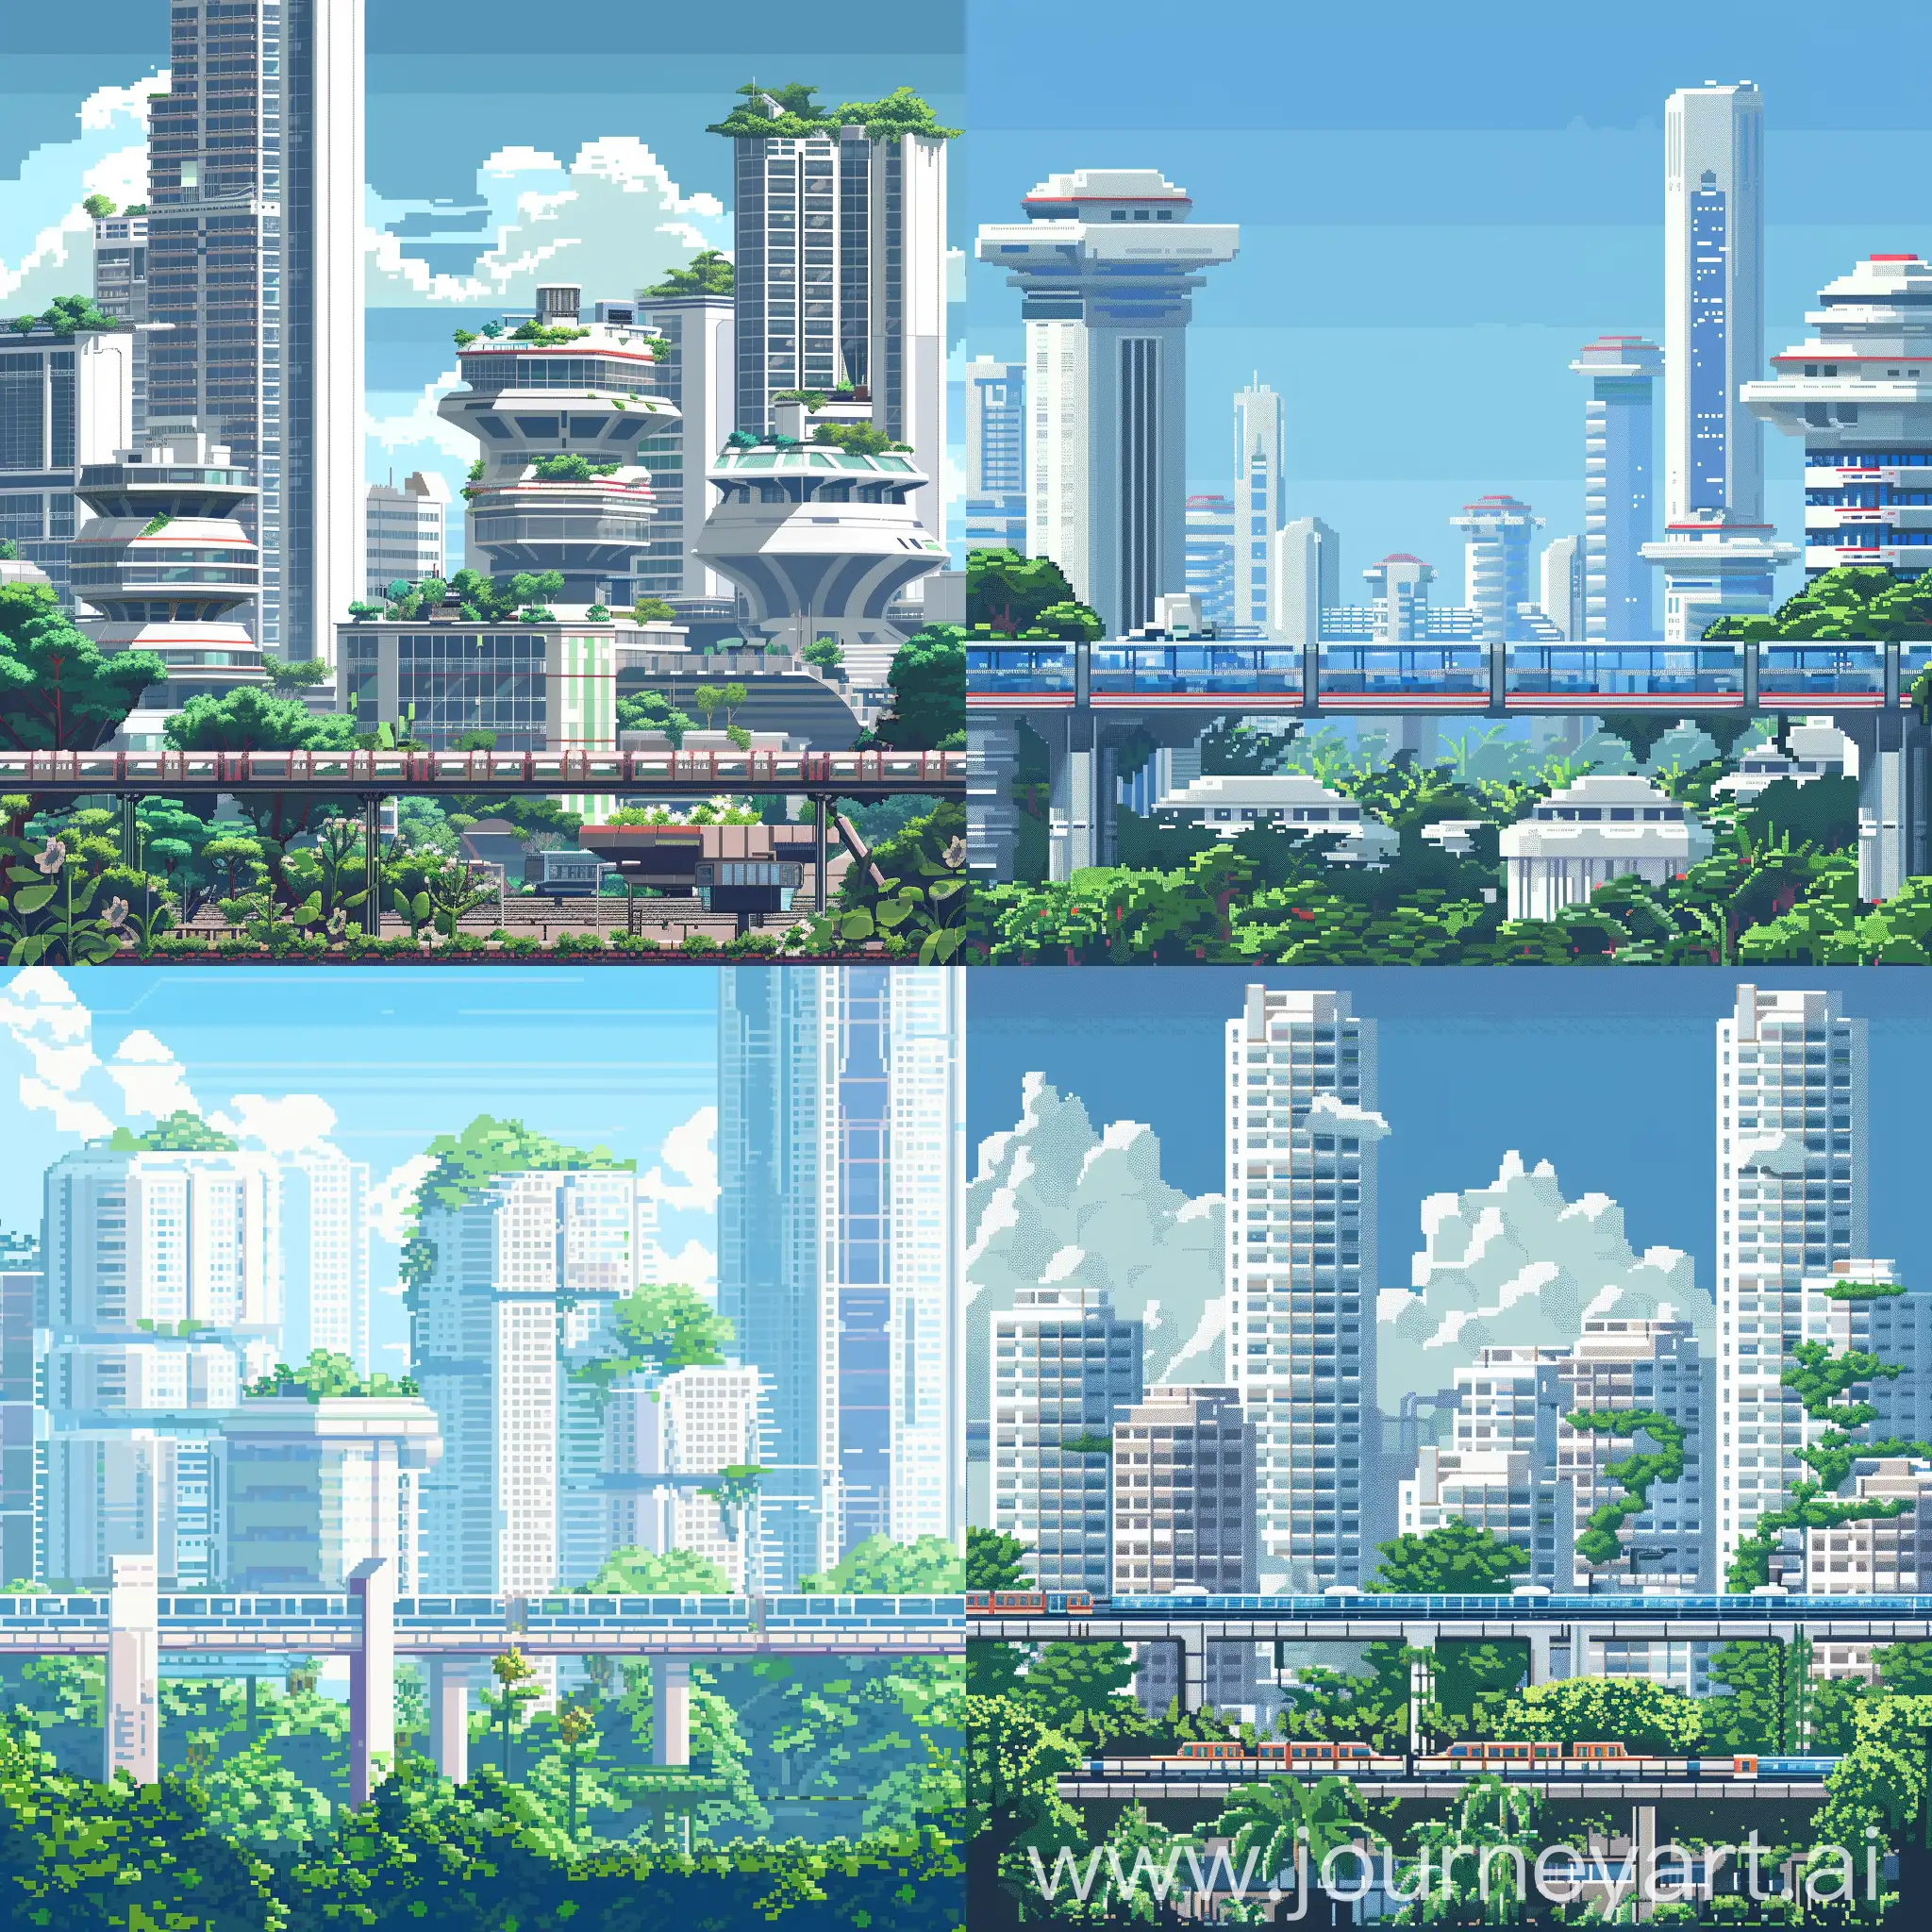 2D pixel art background for a USSR-themed game. Retrofuturism/futurism style. Day. background: Blue sky, monorail, several tall buildings in the distance with white concrete and glass cladding. Buildings - Rounded or sharp angles. Foreground: one glassy building 2 floors, many vegetation and other futuristic elements.